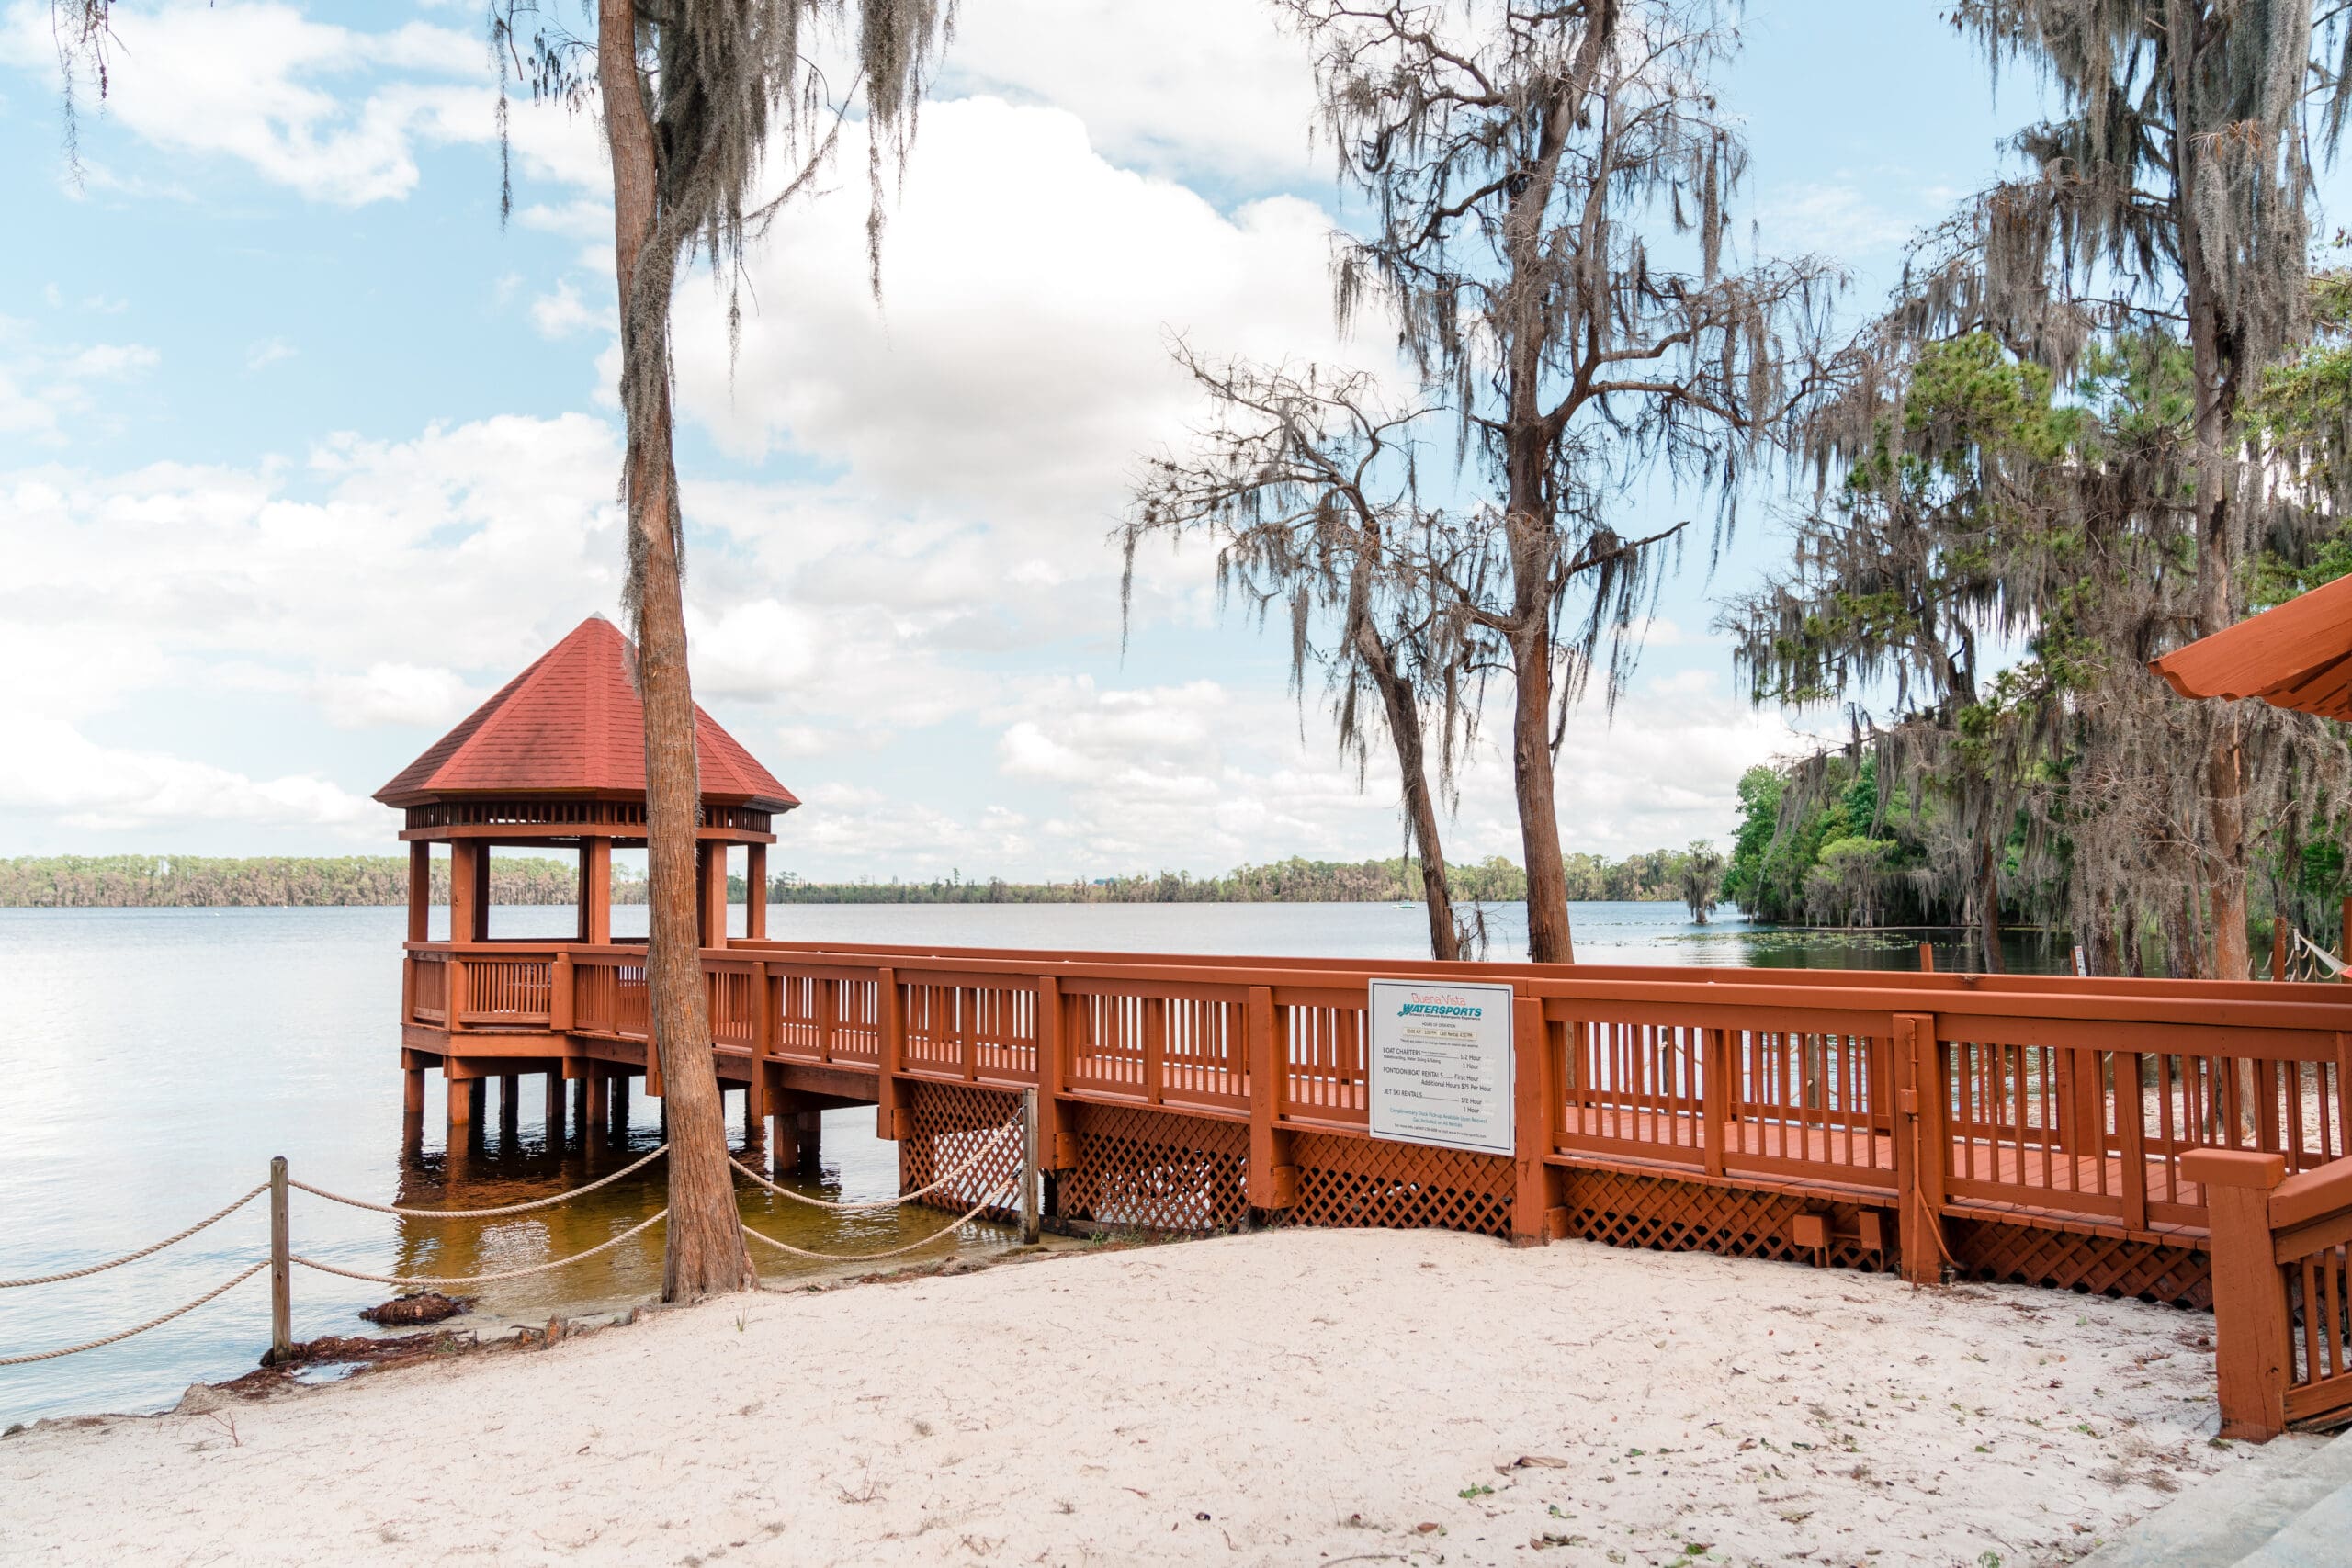 Iconic shot of Paradise Cove pier with a gazebo at the end, showcasing the sandy beach, clear water, and natural surroundings in the background.